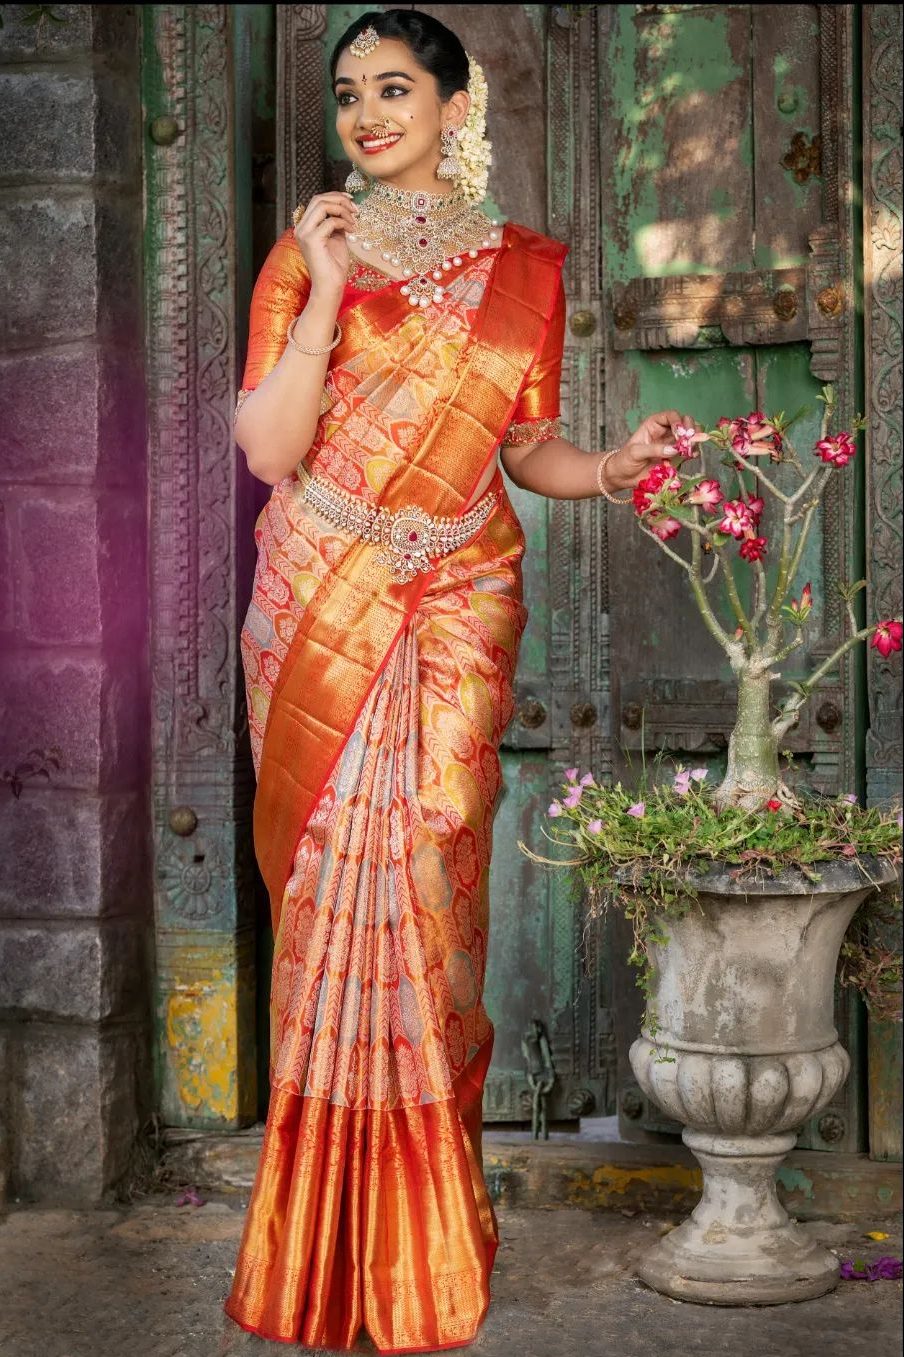 Saanve Megghana In Beautiful South Indian Bridal Outfit Look Is An ...